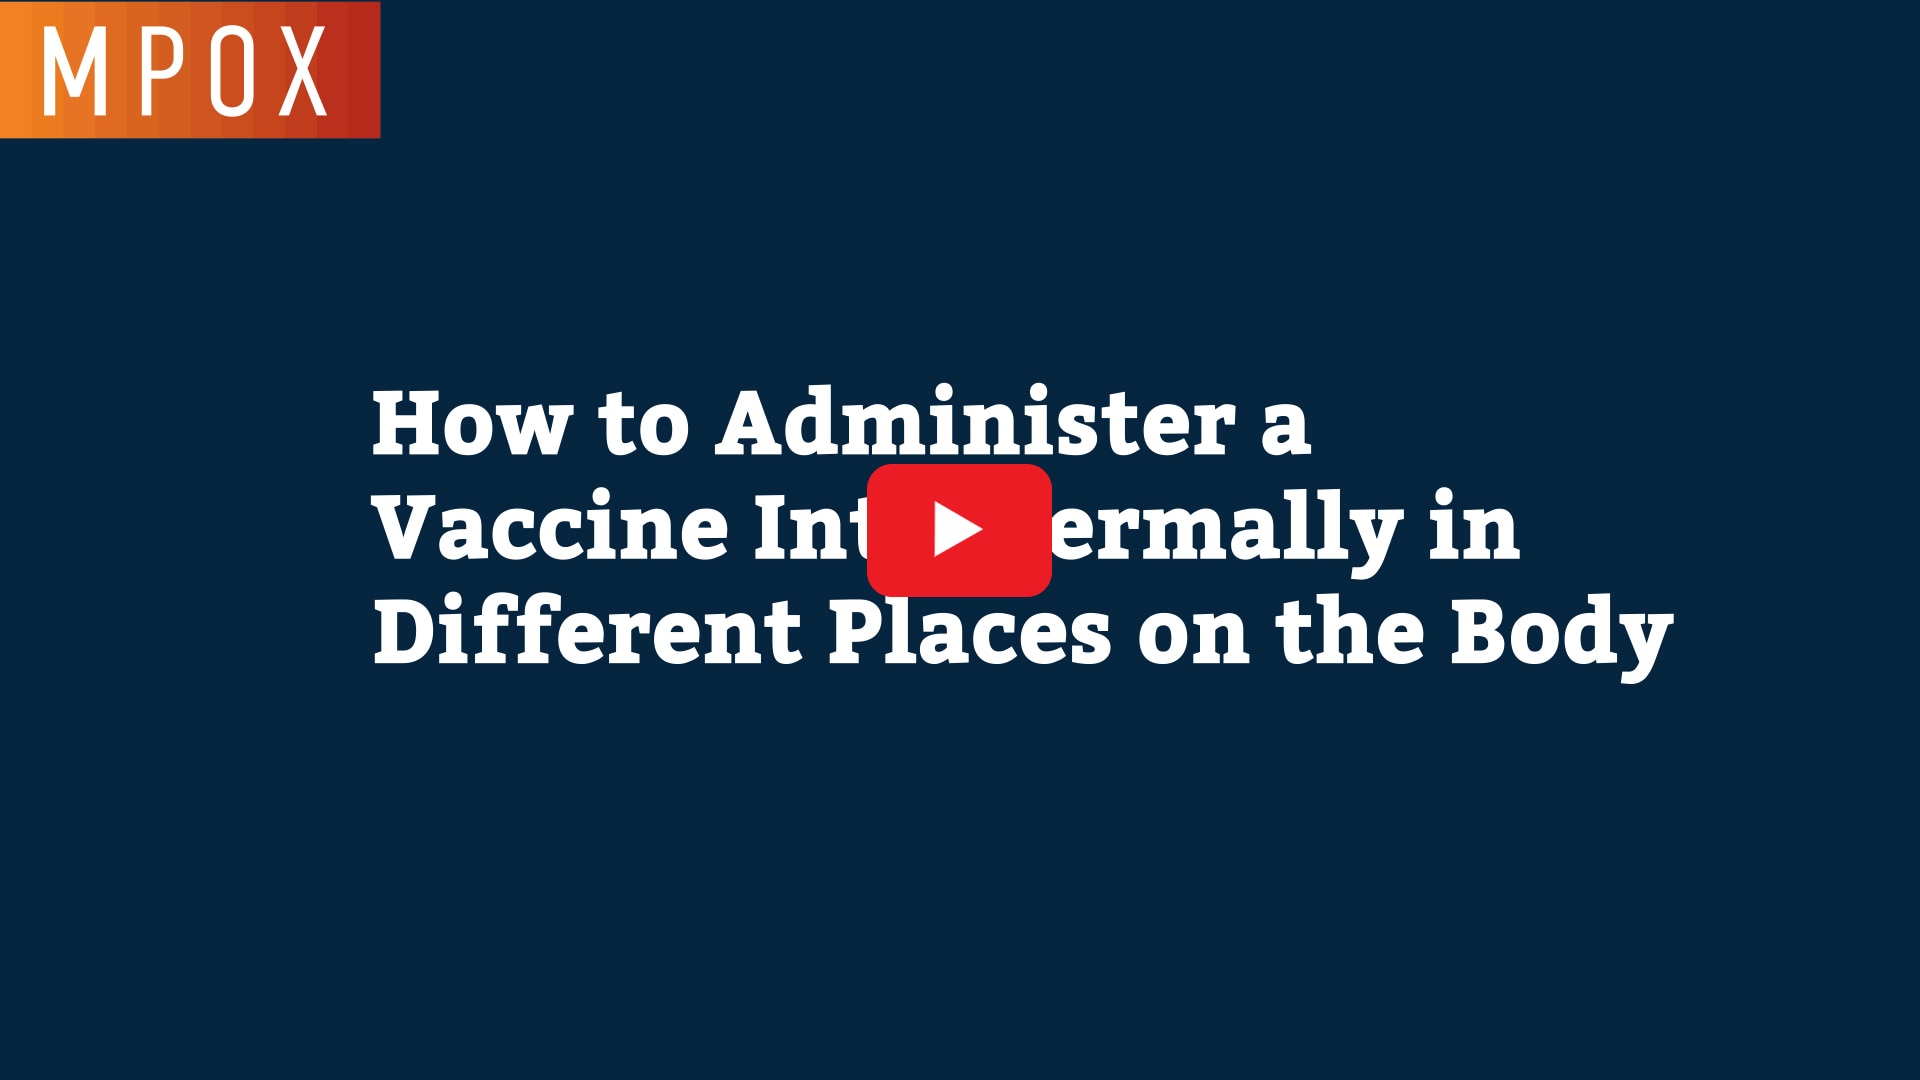 This video demonstrates how to administer an intradermal vaccine.